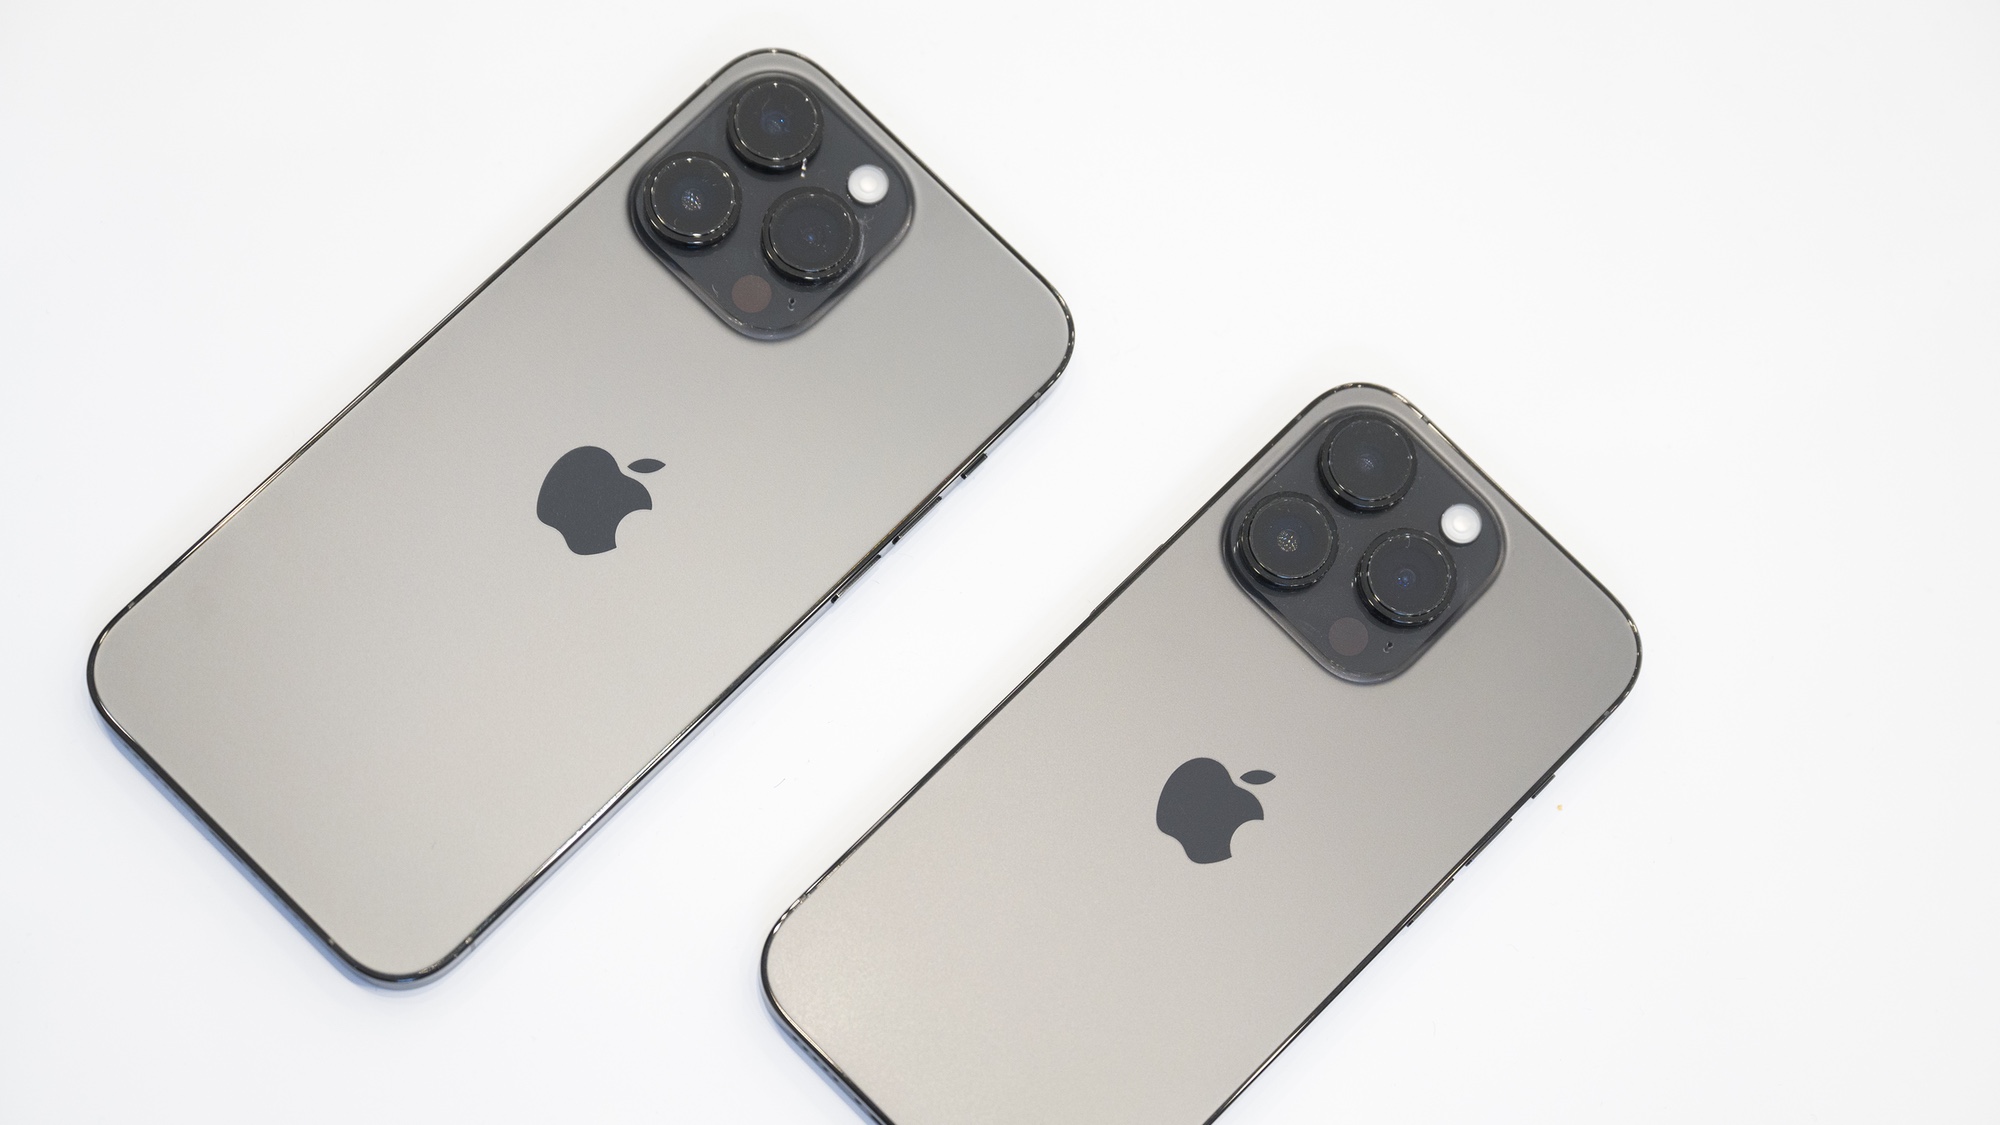 What to expect from the iPhone 14 Pro & iPhone 14 Pro Max